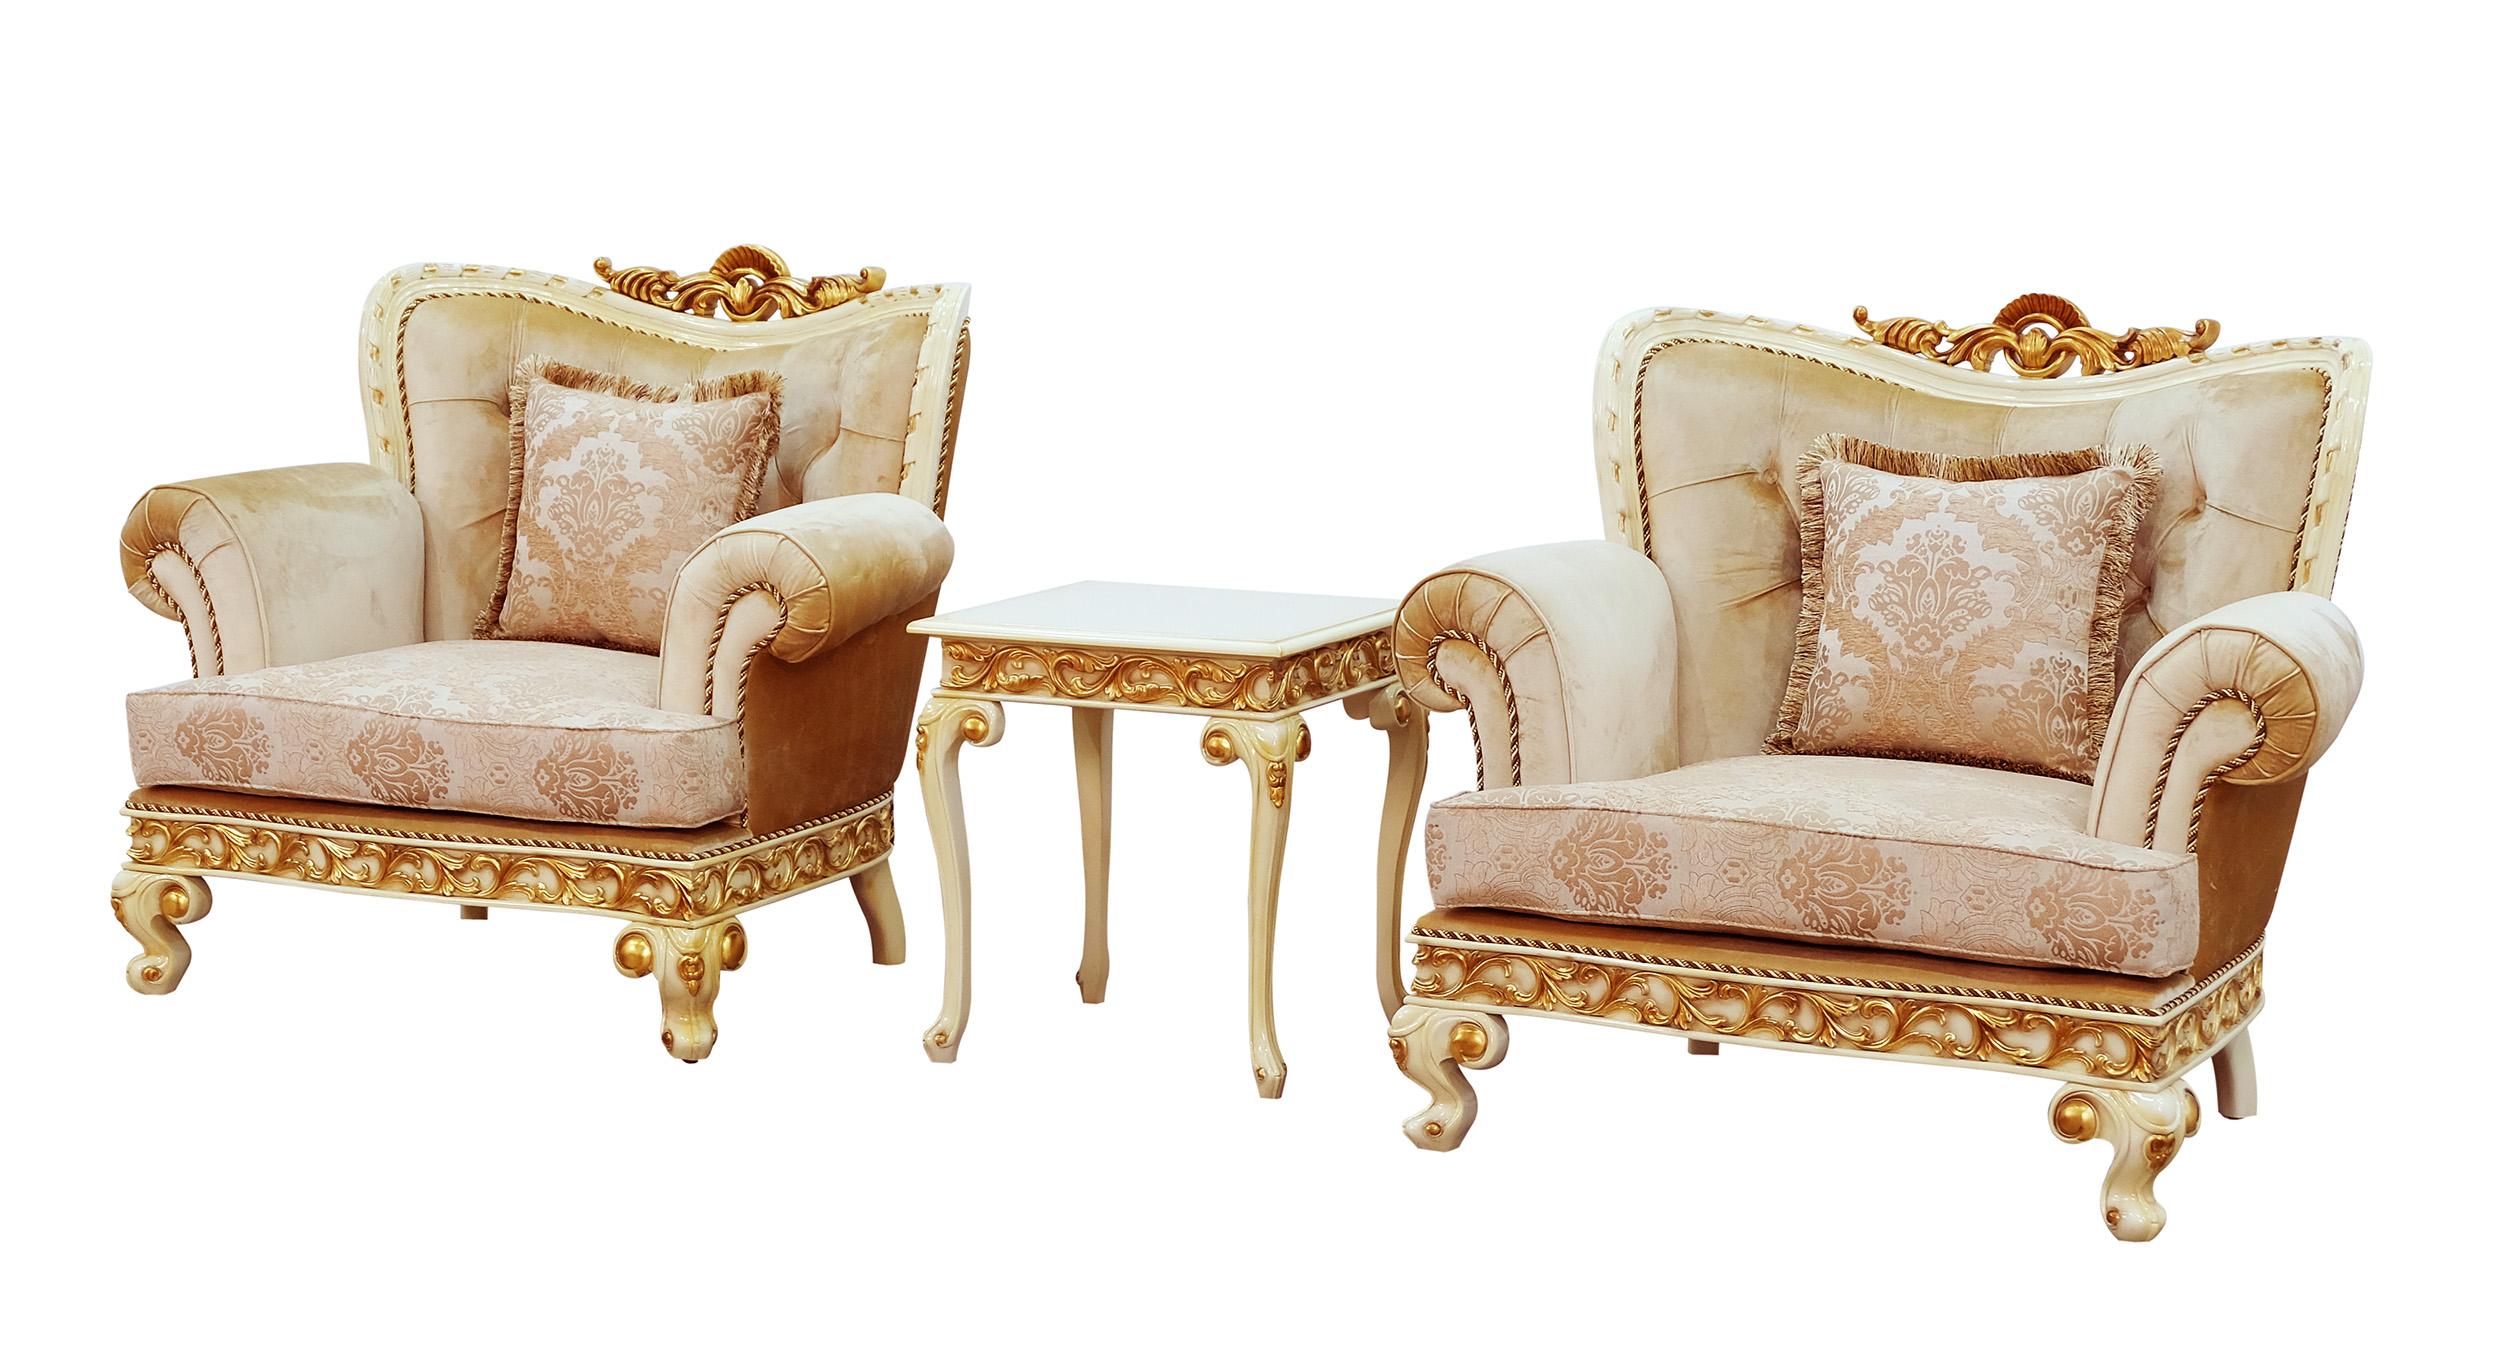 Classic, Traditional Arm Chair Set FANTASIA 40015-C-Set-2 in Off-White, Sand, Gold Fabric